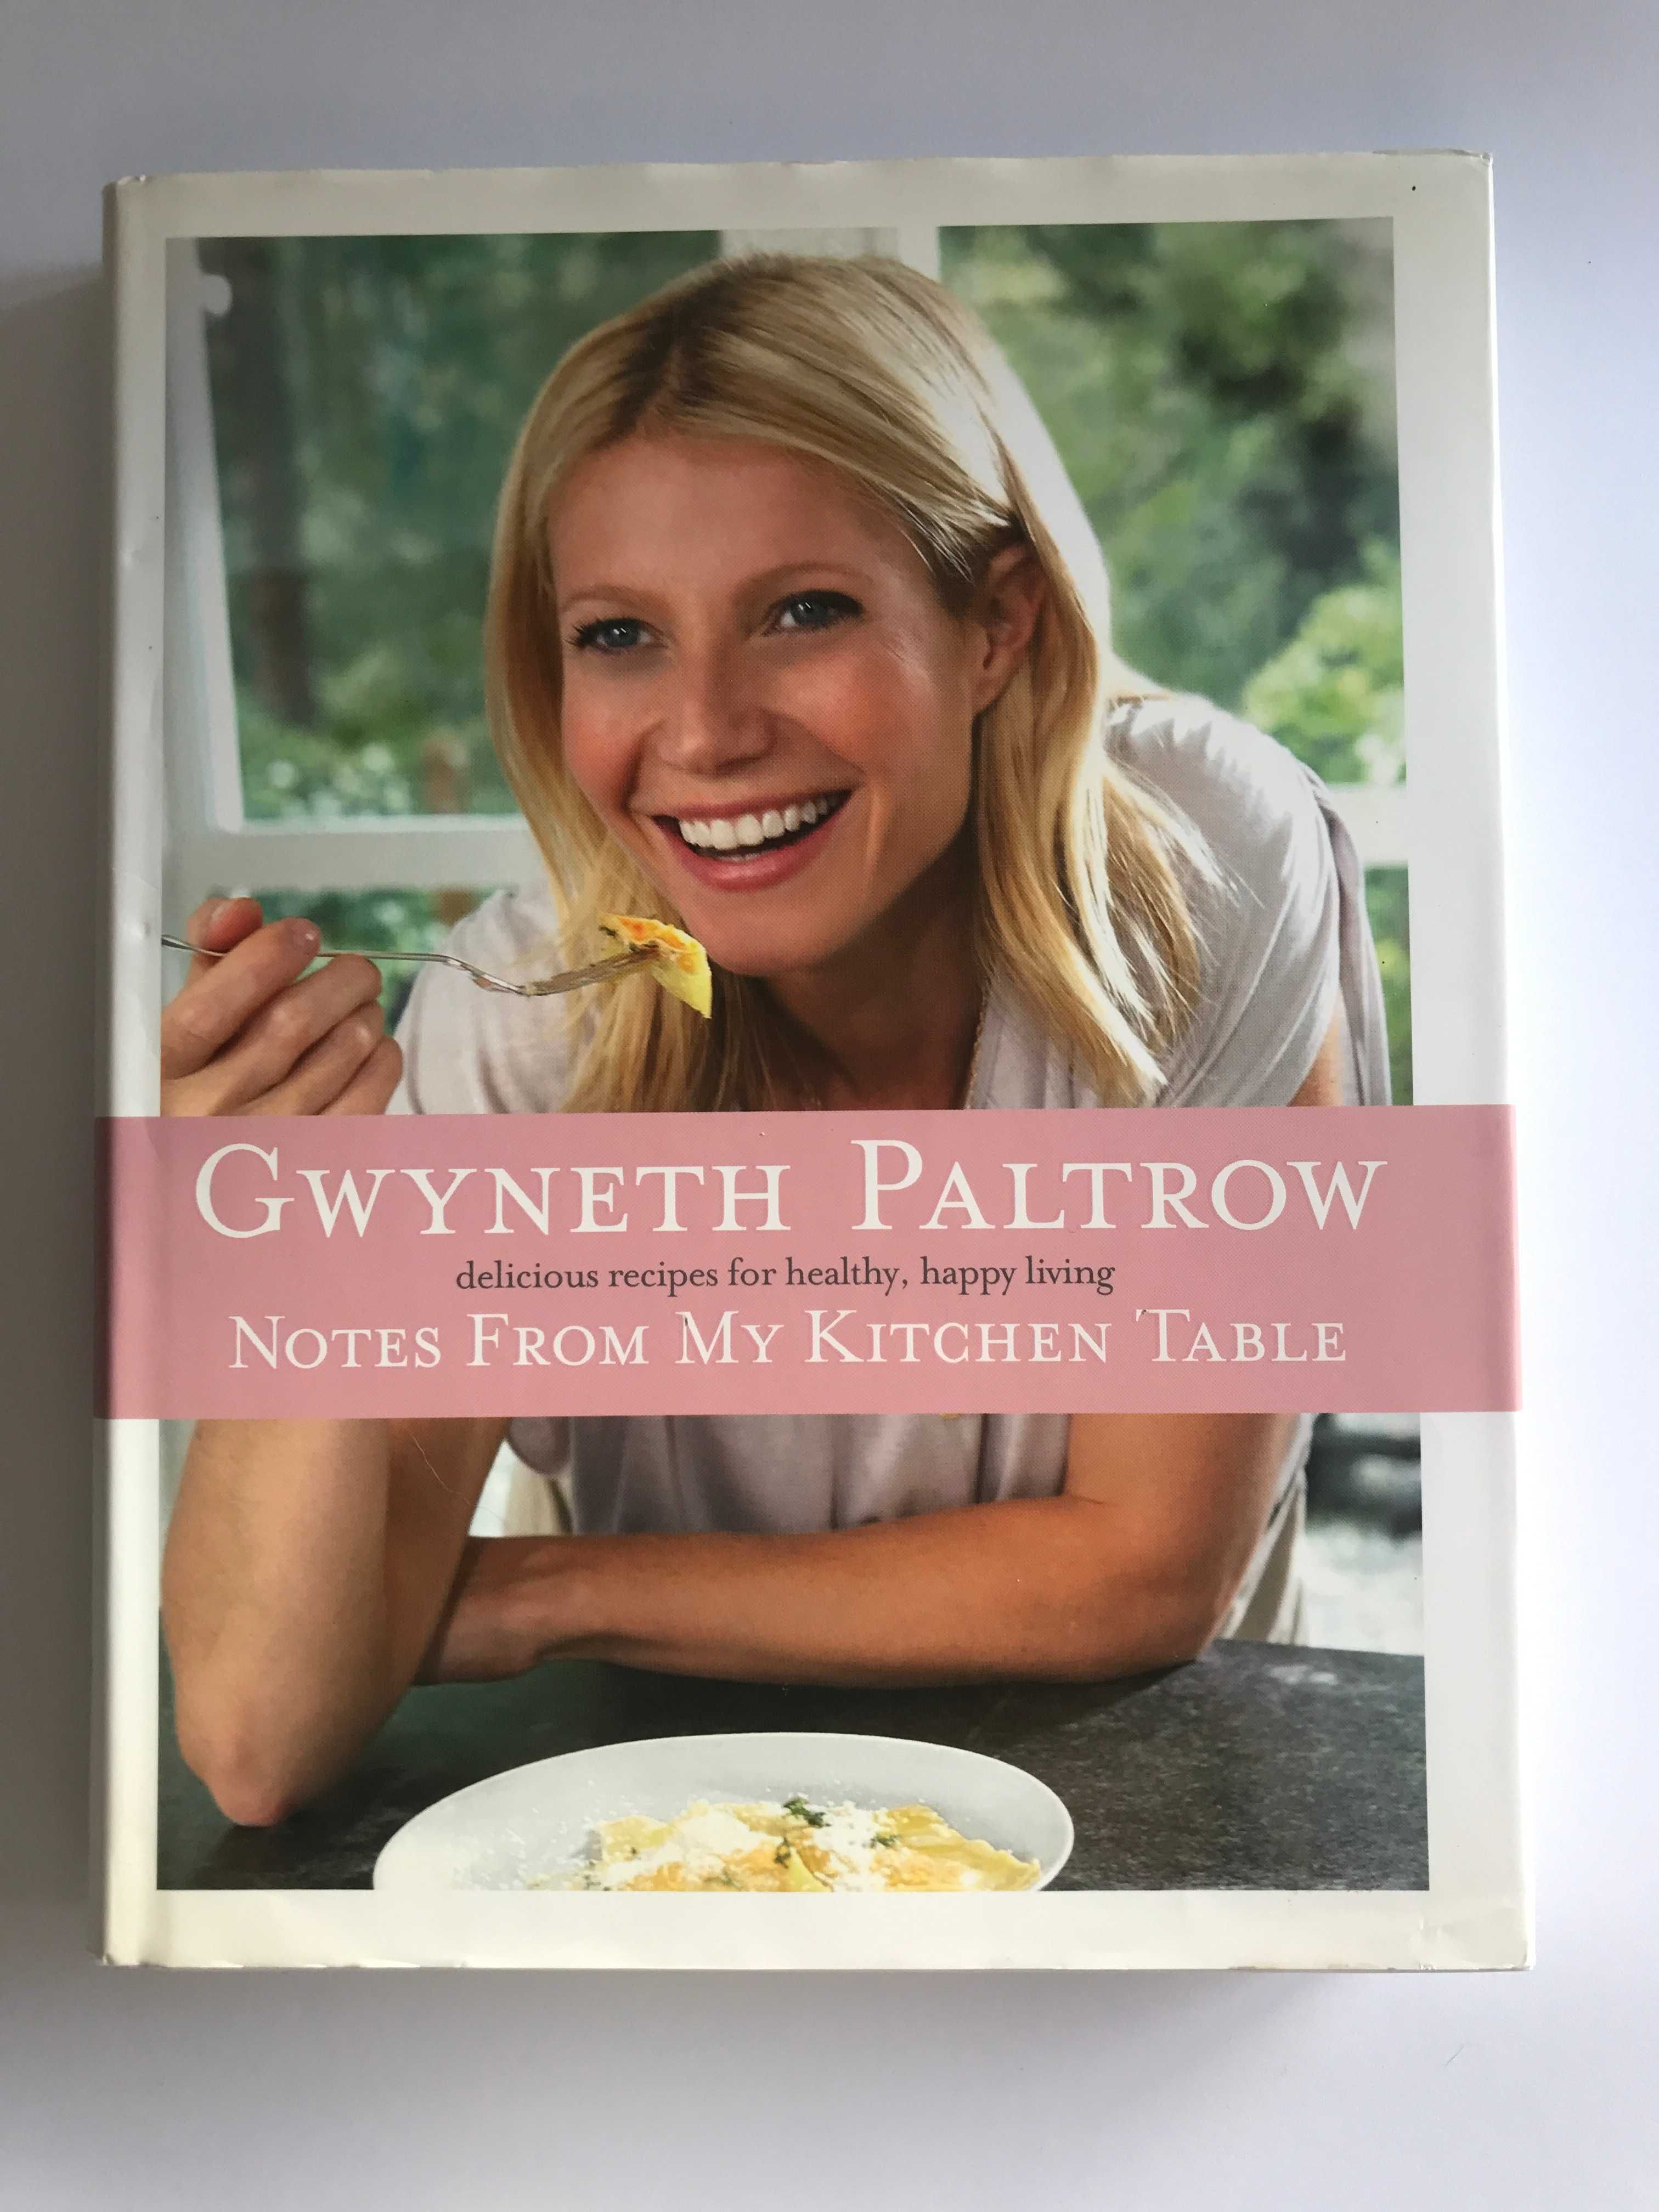 "Notes from my Kitchen Table" de Gwyneth Paltrow